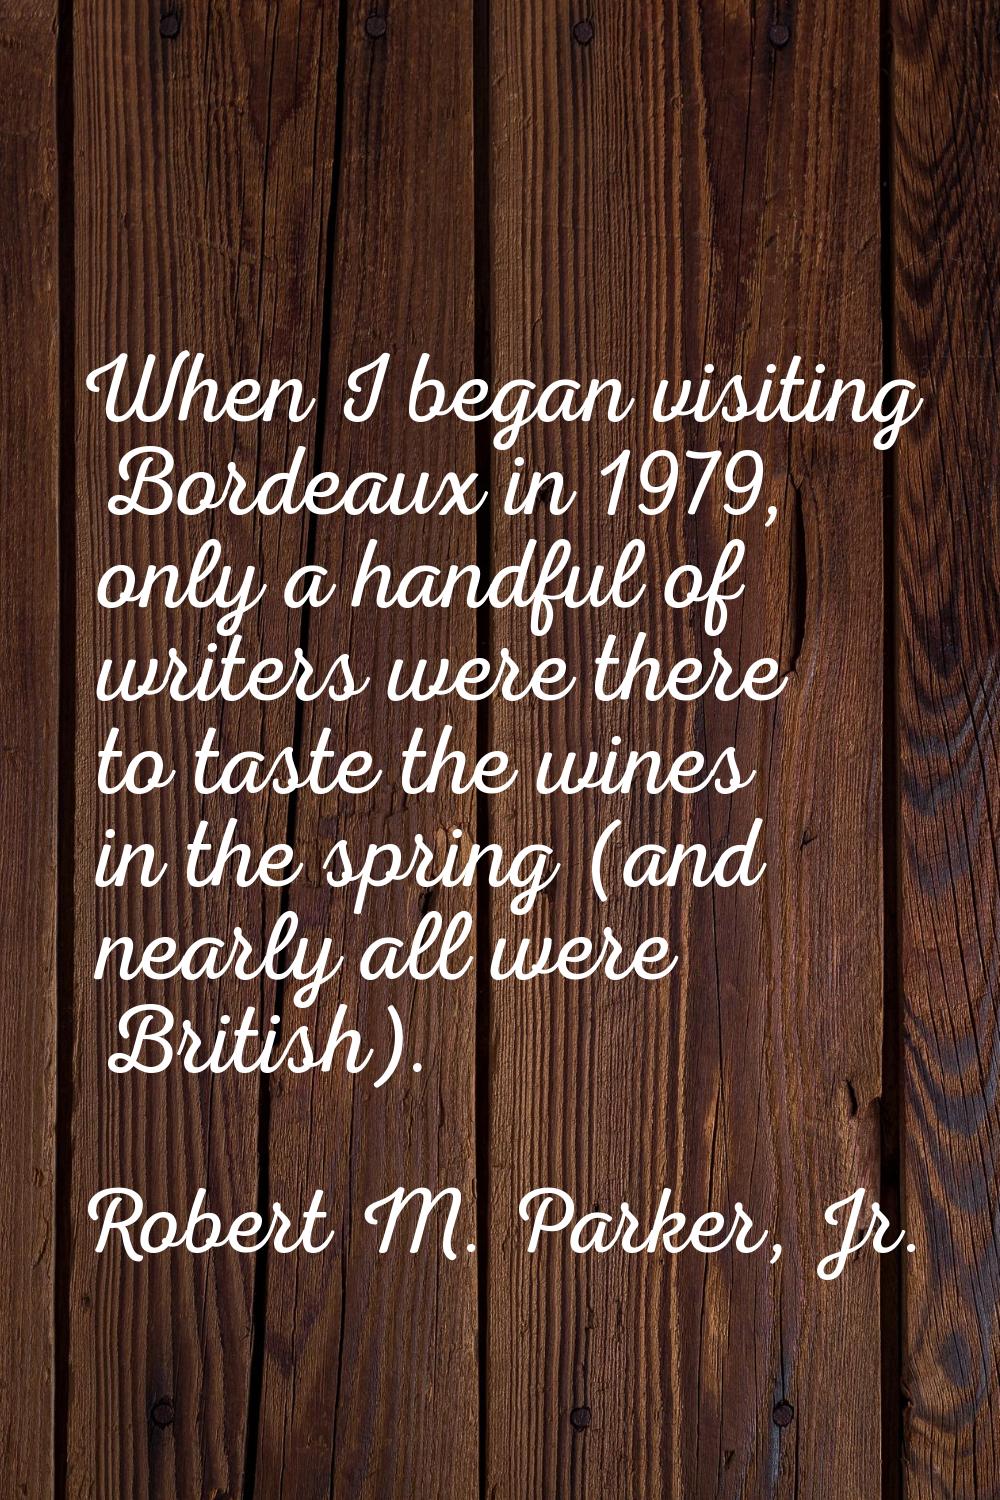 When I began visiting Bordeaux in 1979, only a handful of writers were there to taste the wines in 